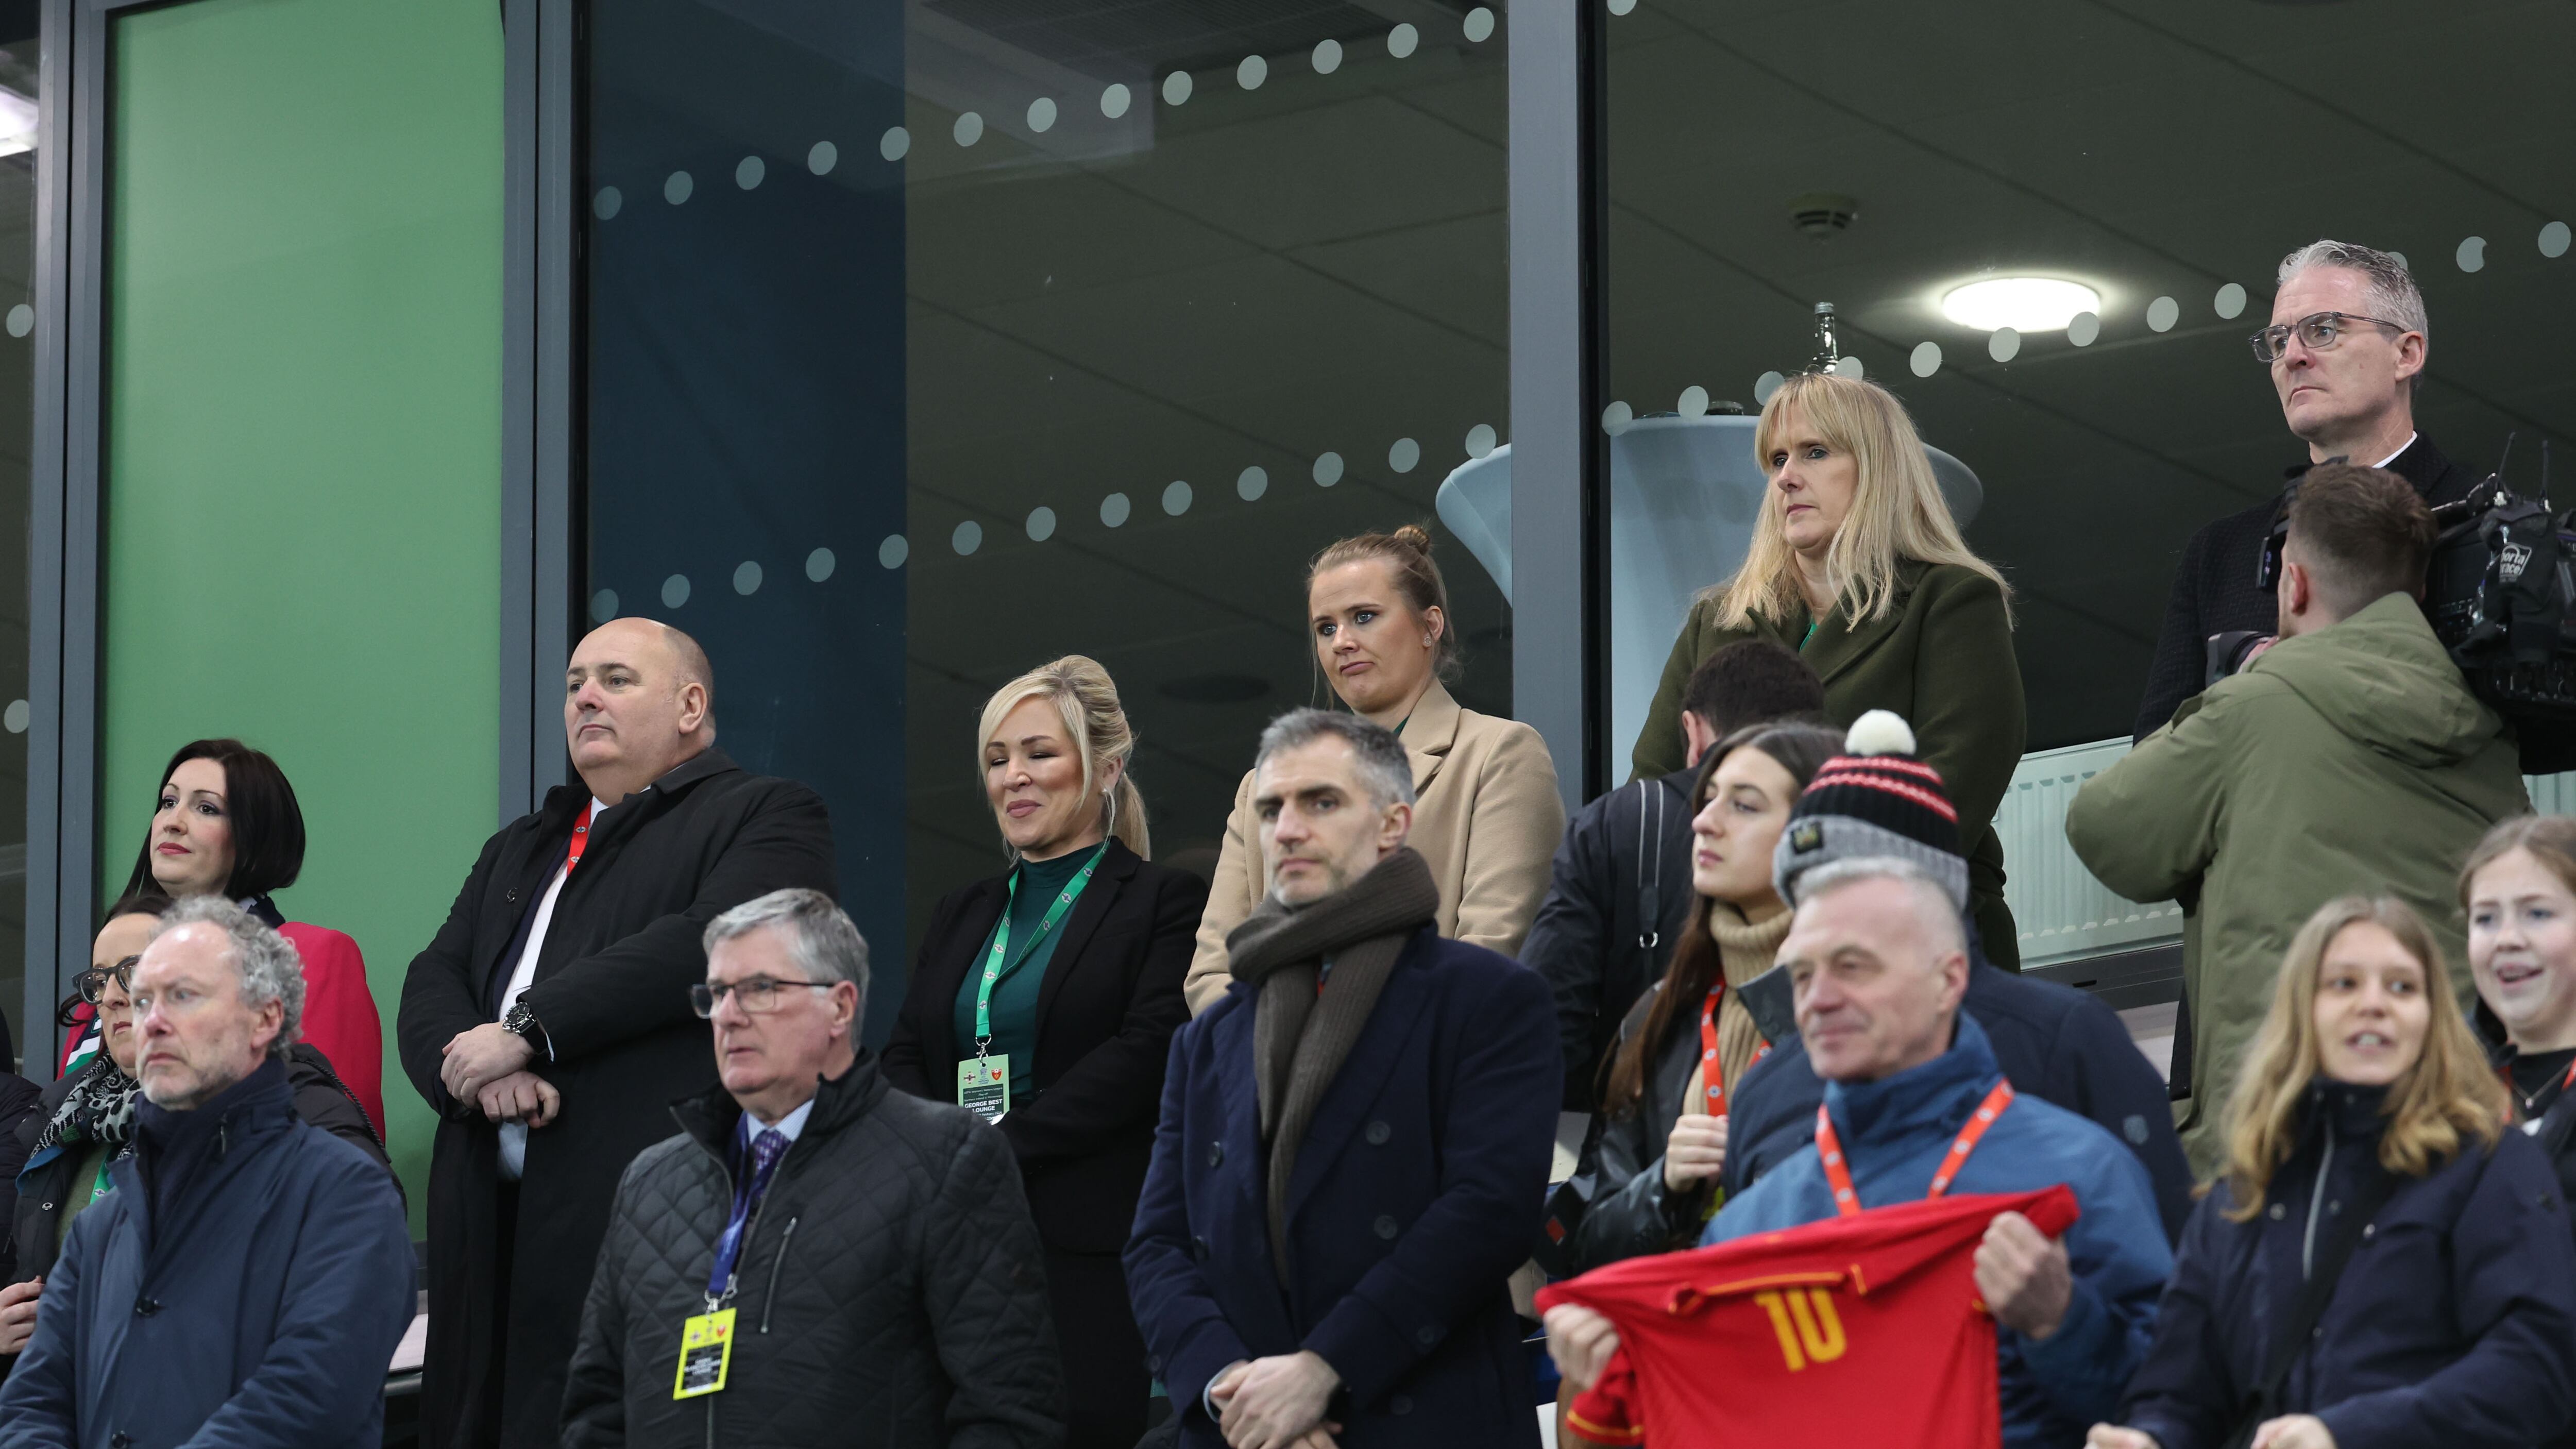 First Minister Michelle O’Neill and junior ministers Aisling Reilly  attend The Uefa Women's Nations League match between Northern Ireland and Montenegro on Tuesday at Windsor Park in Belfast.
PICTURE COLM LENAGHAN